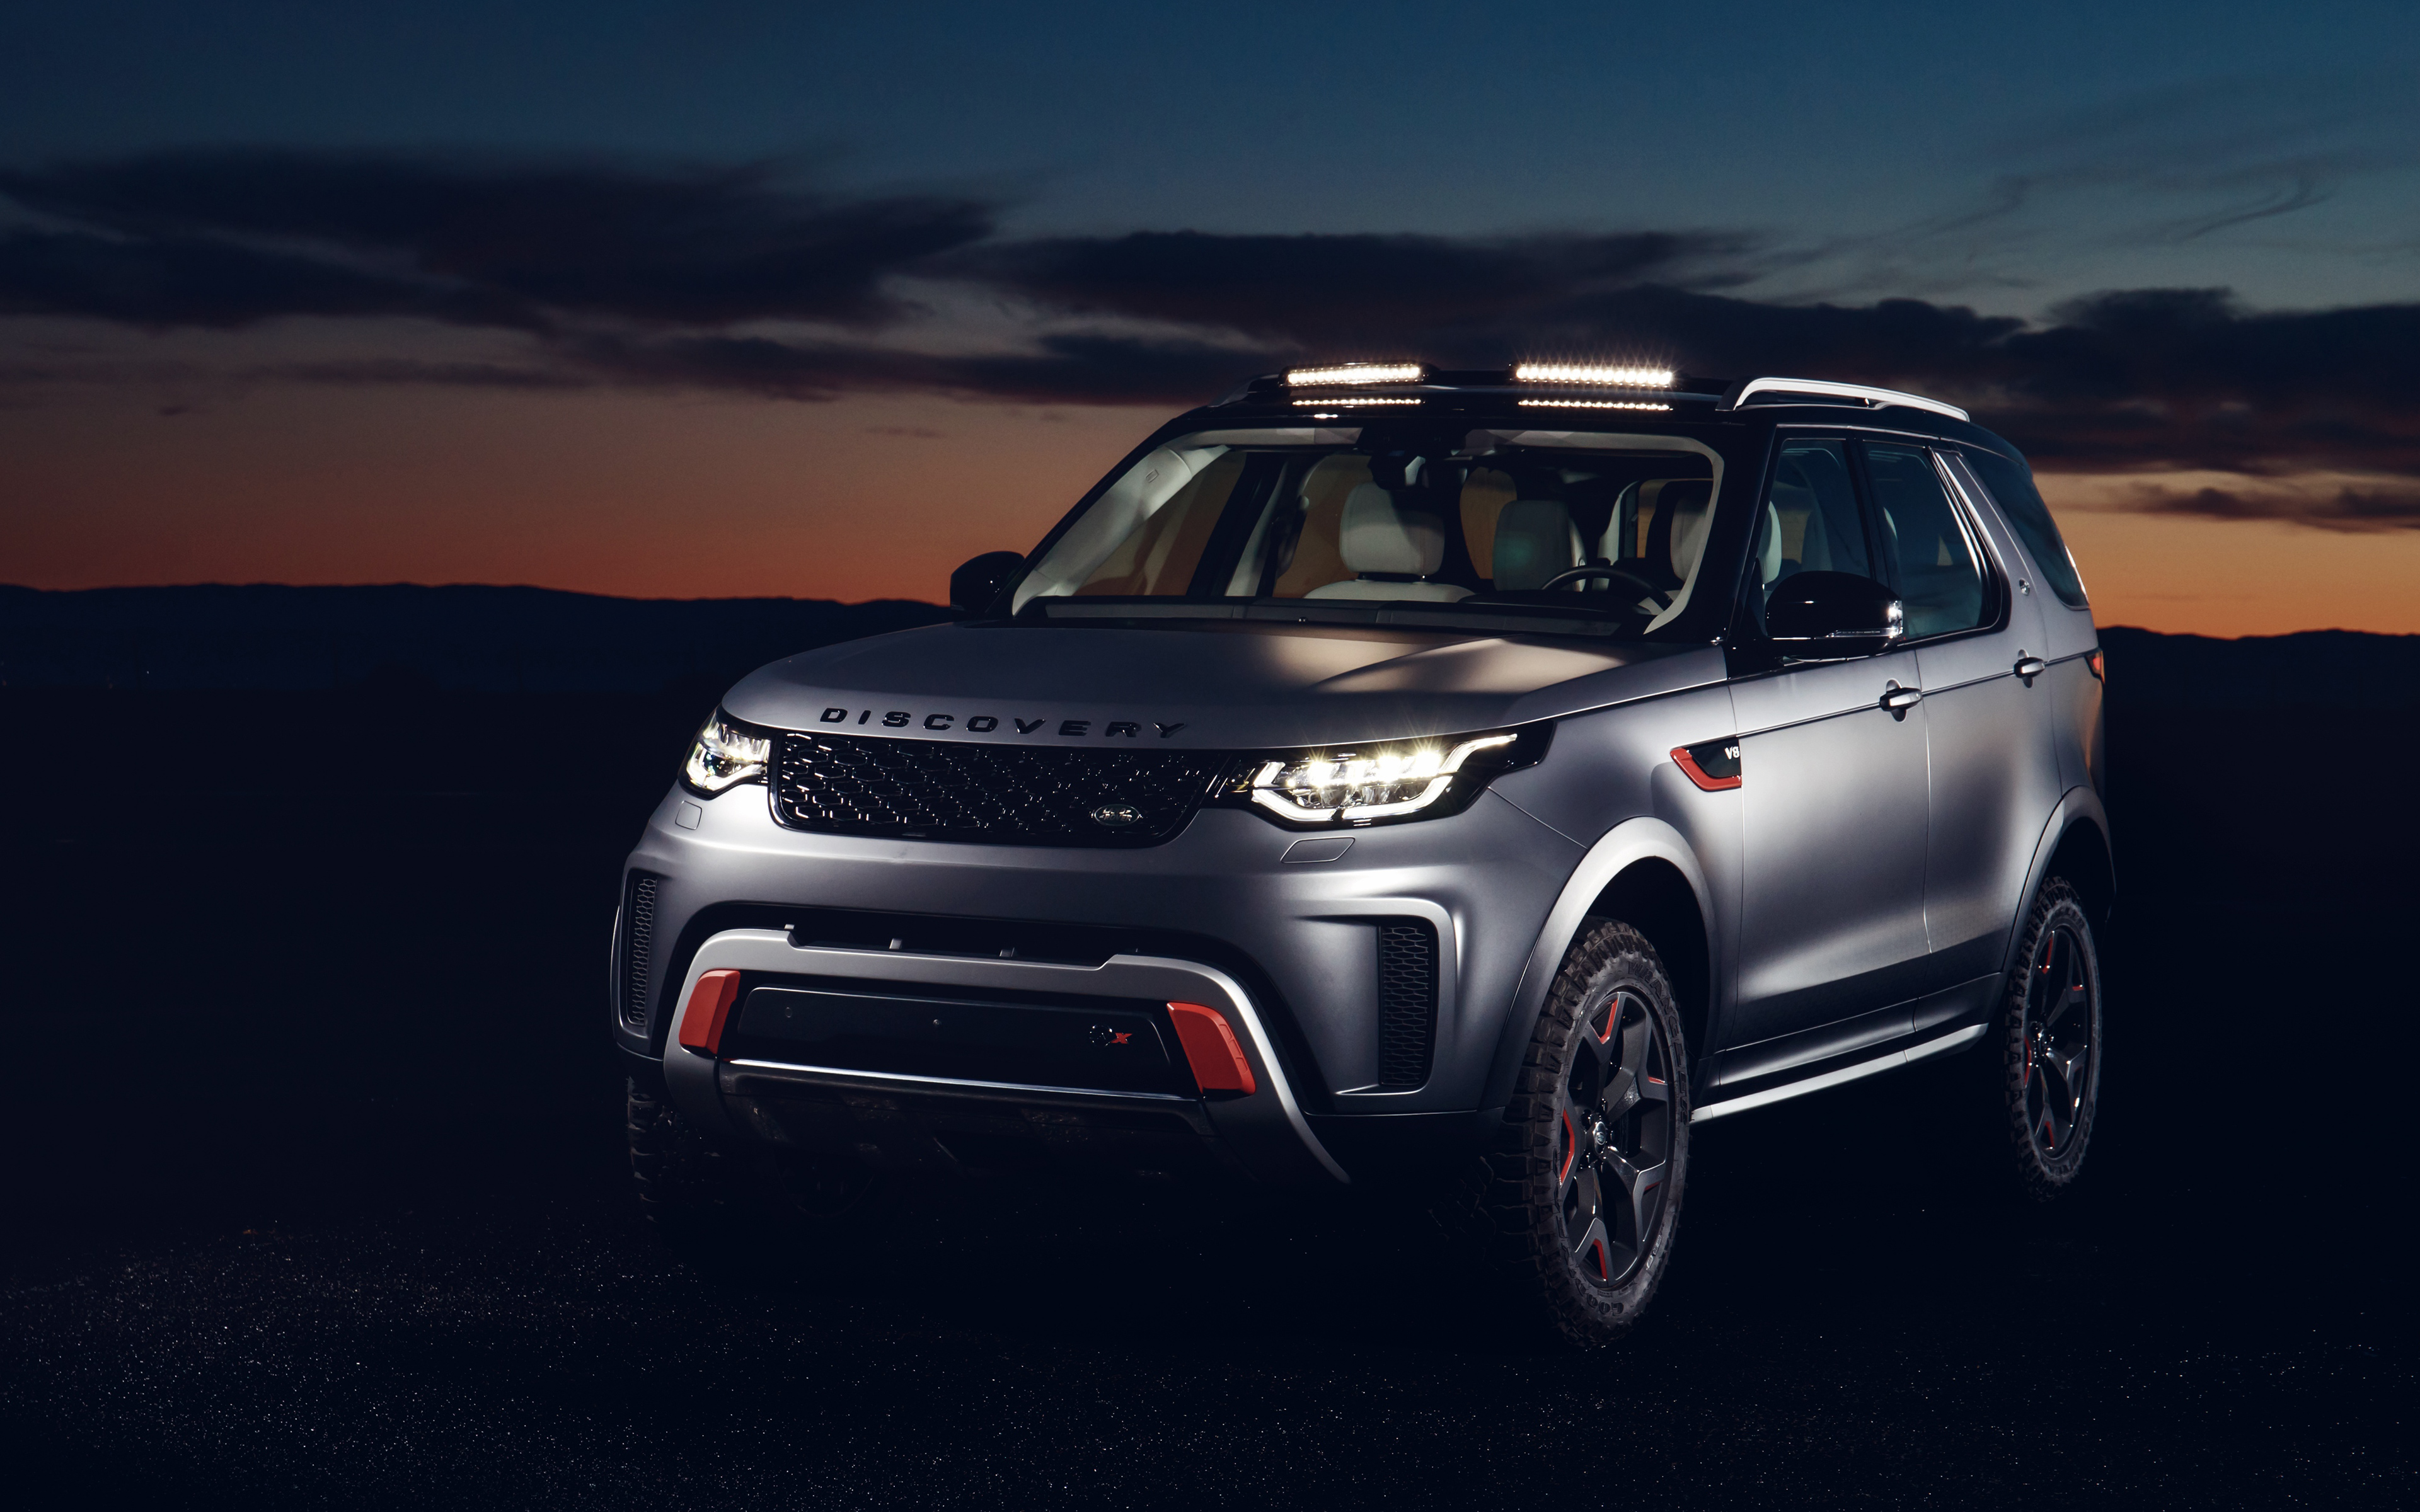 2018 Land Rover Discovery SVX 4K Wallpapers